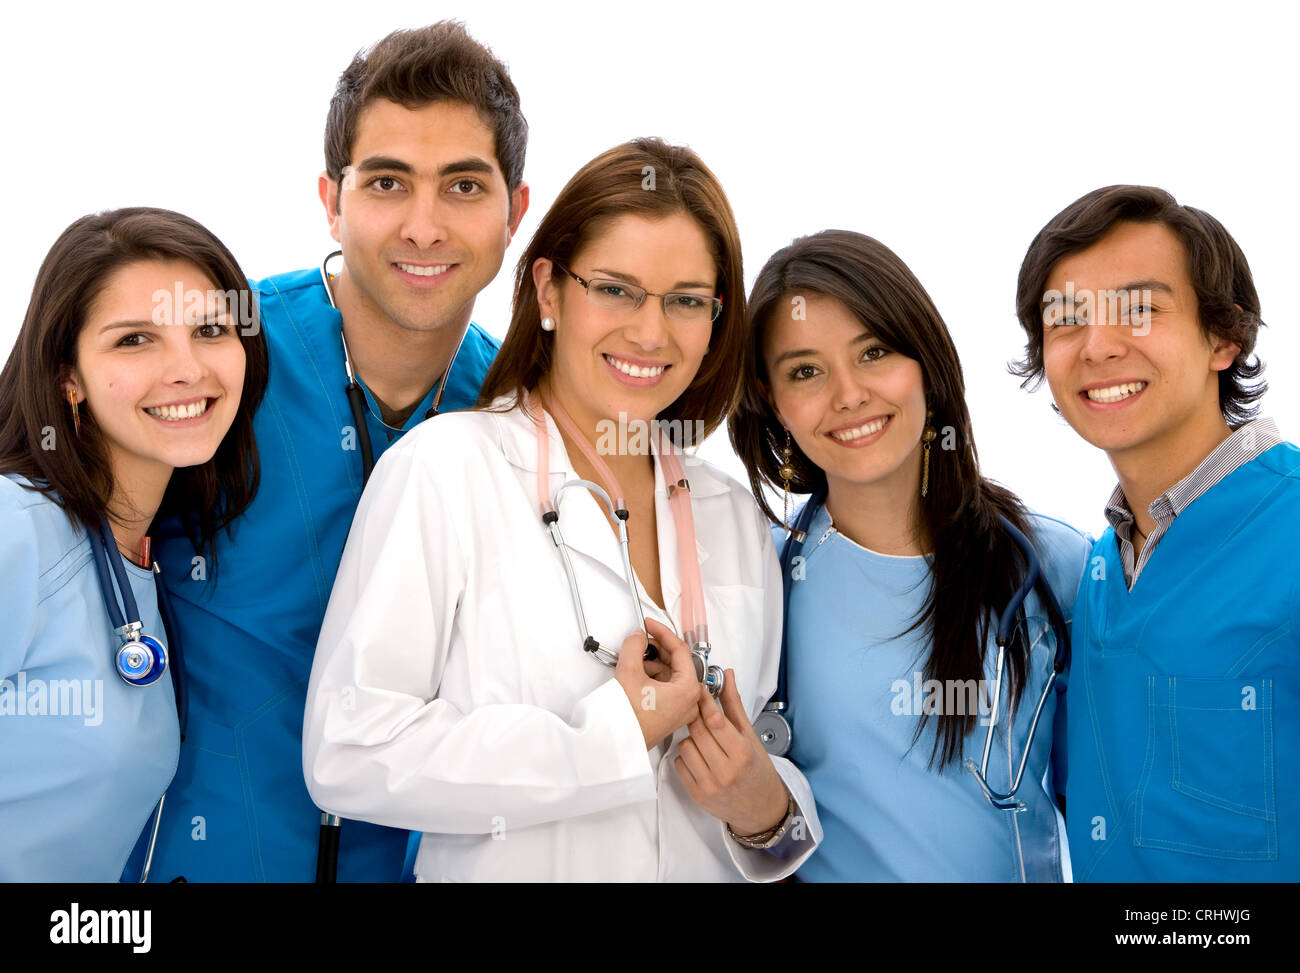 group of doctors Stock Photo